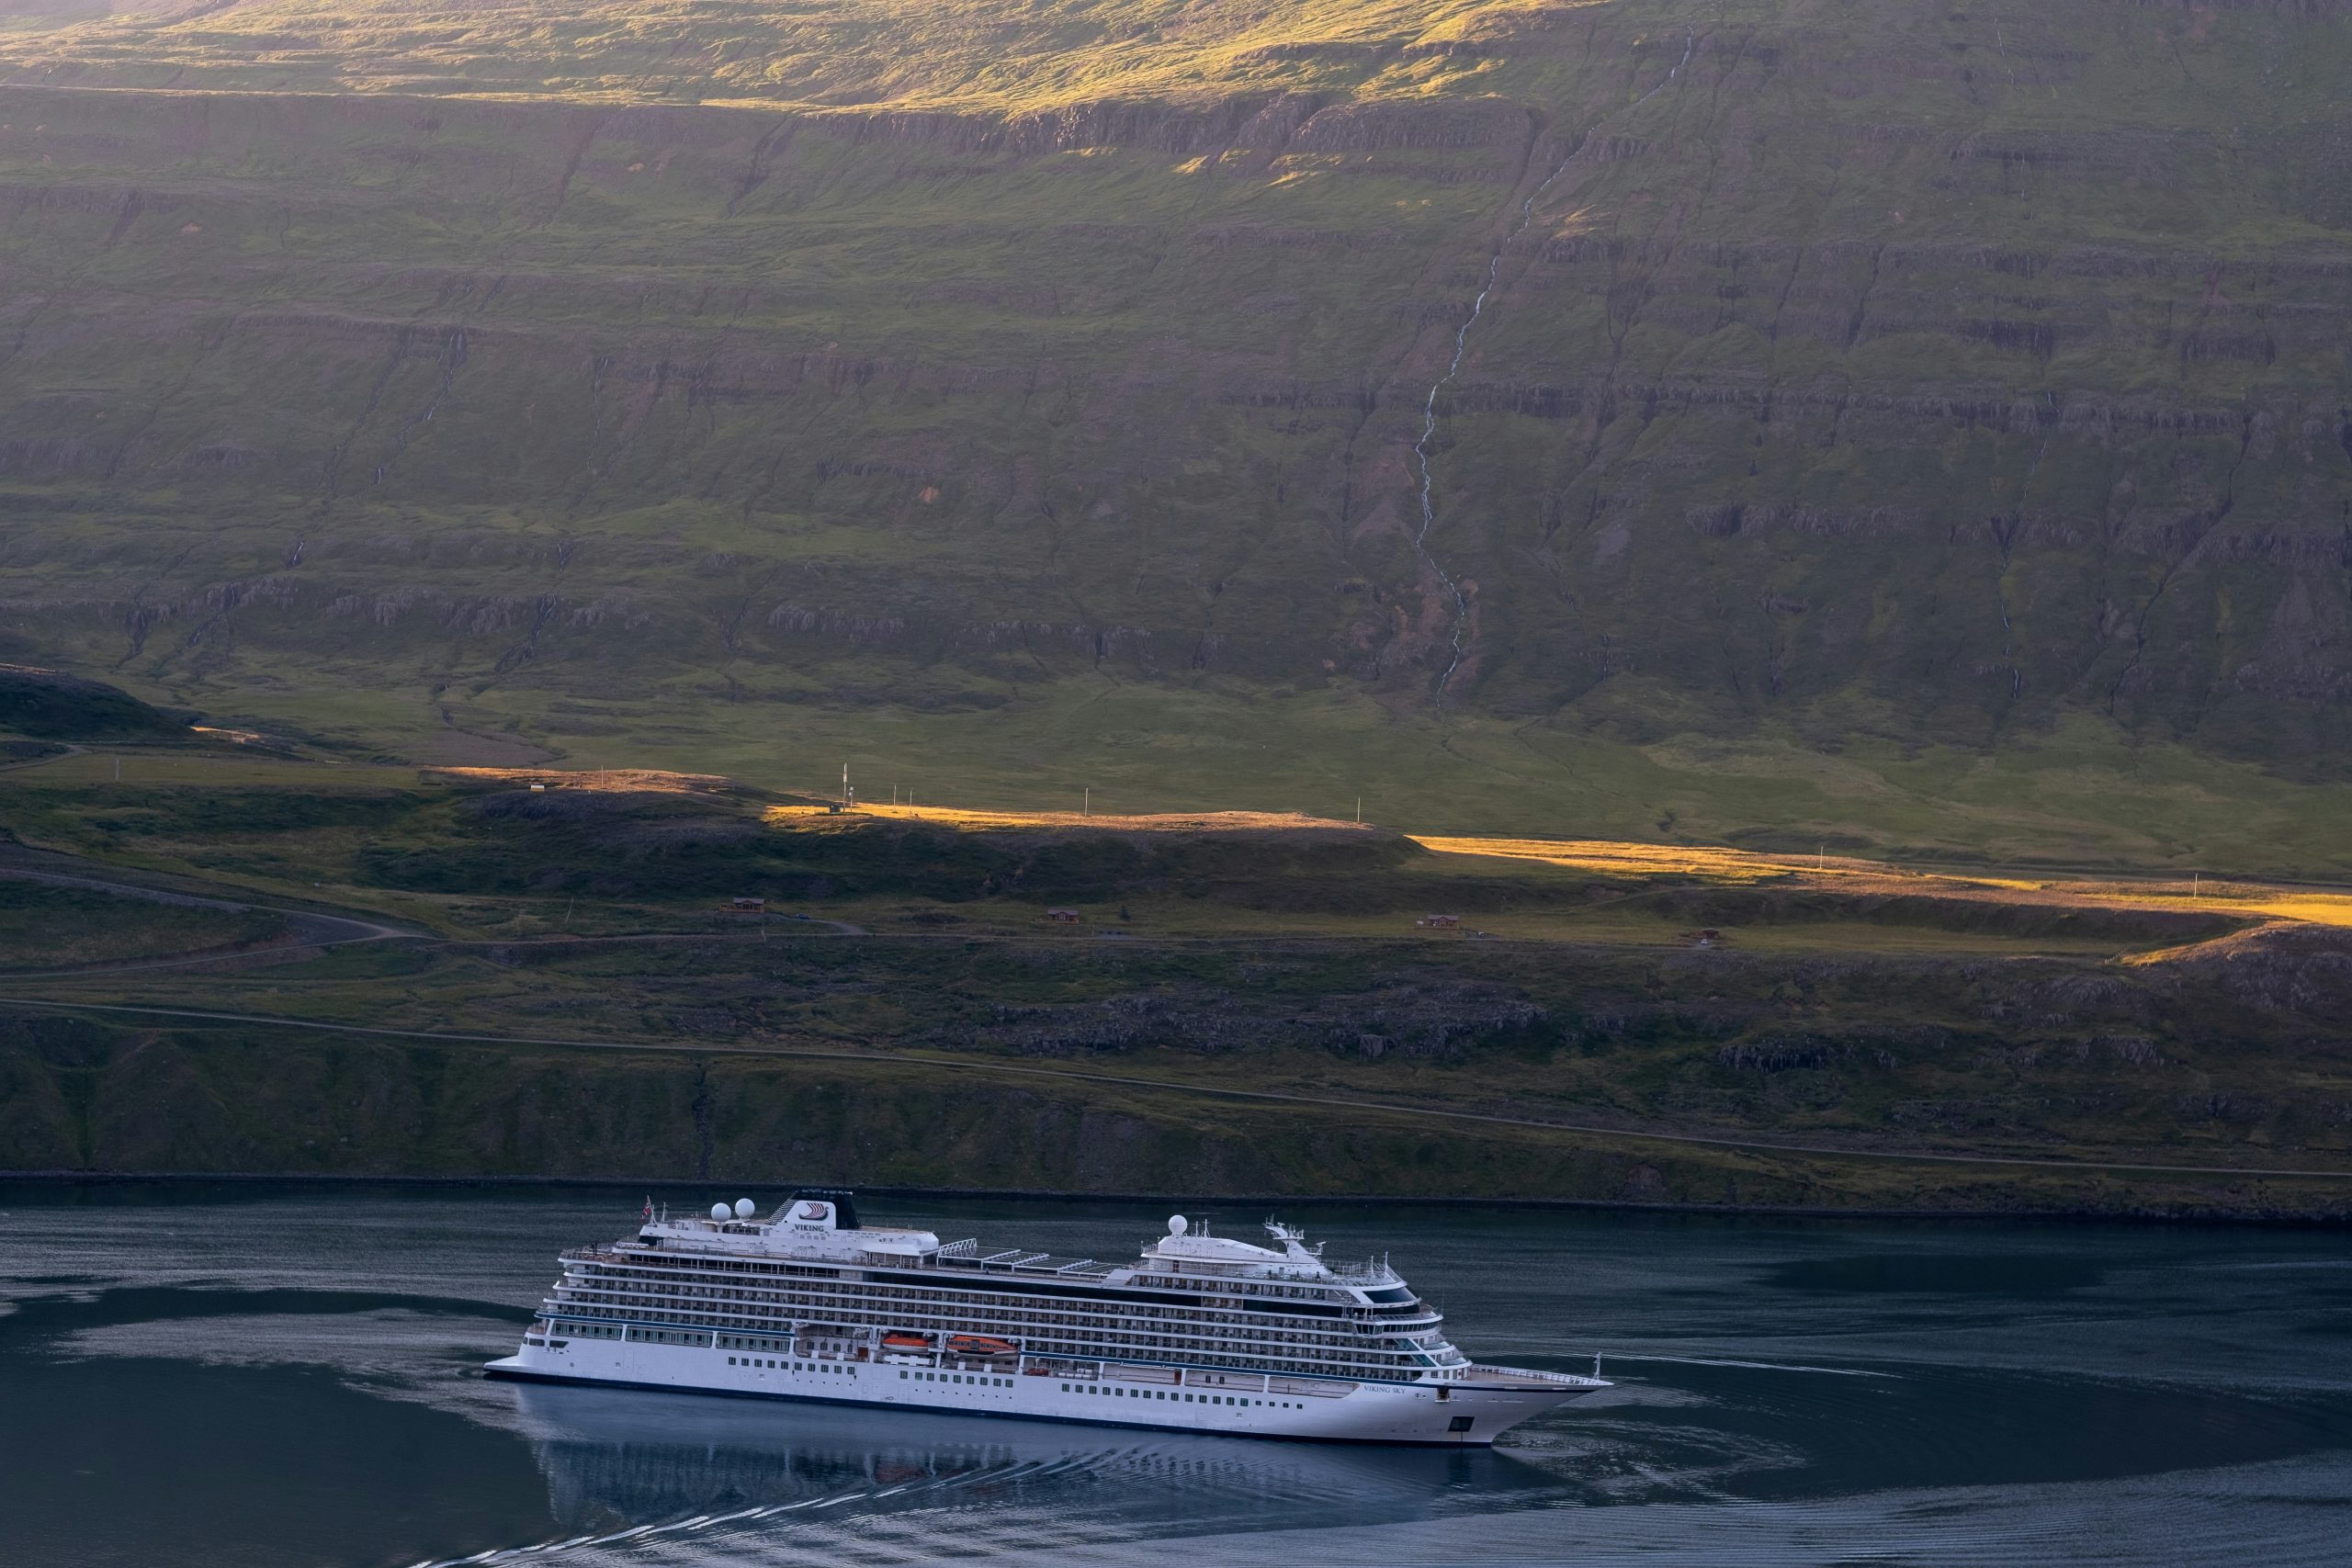 explore the stunning fjords with unforgettable fjord cruises. discover breathtaking landscapes and wildlife on a fjord cruise experience of a lifetime.